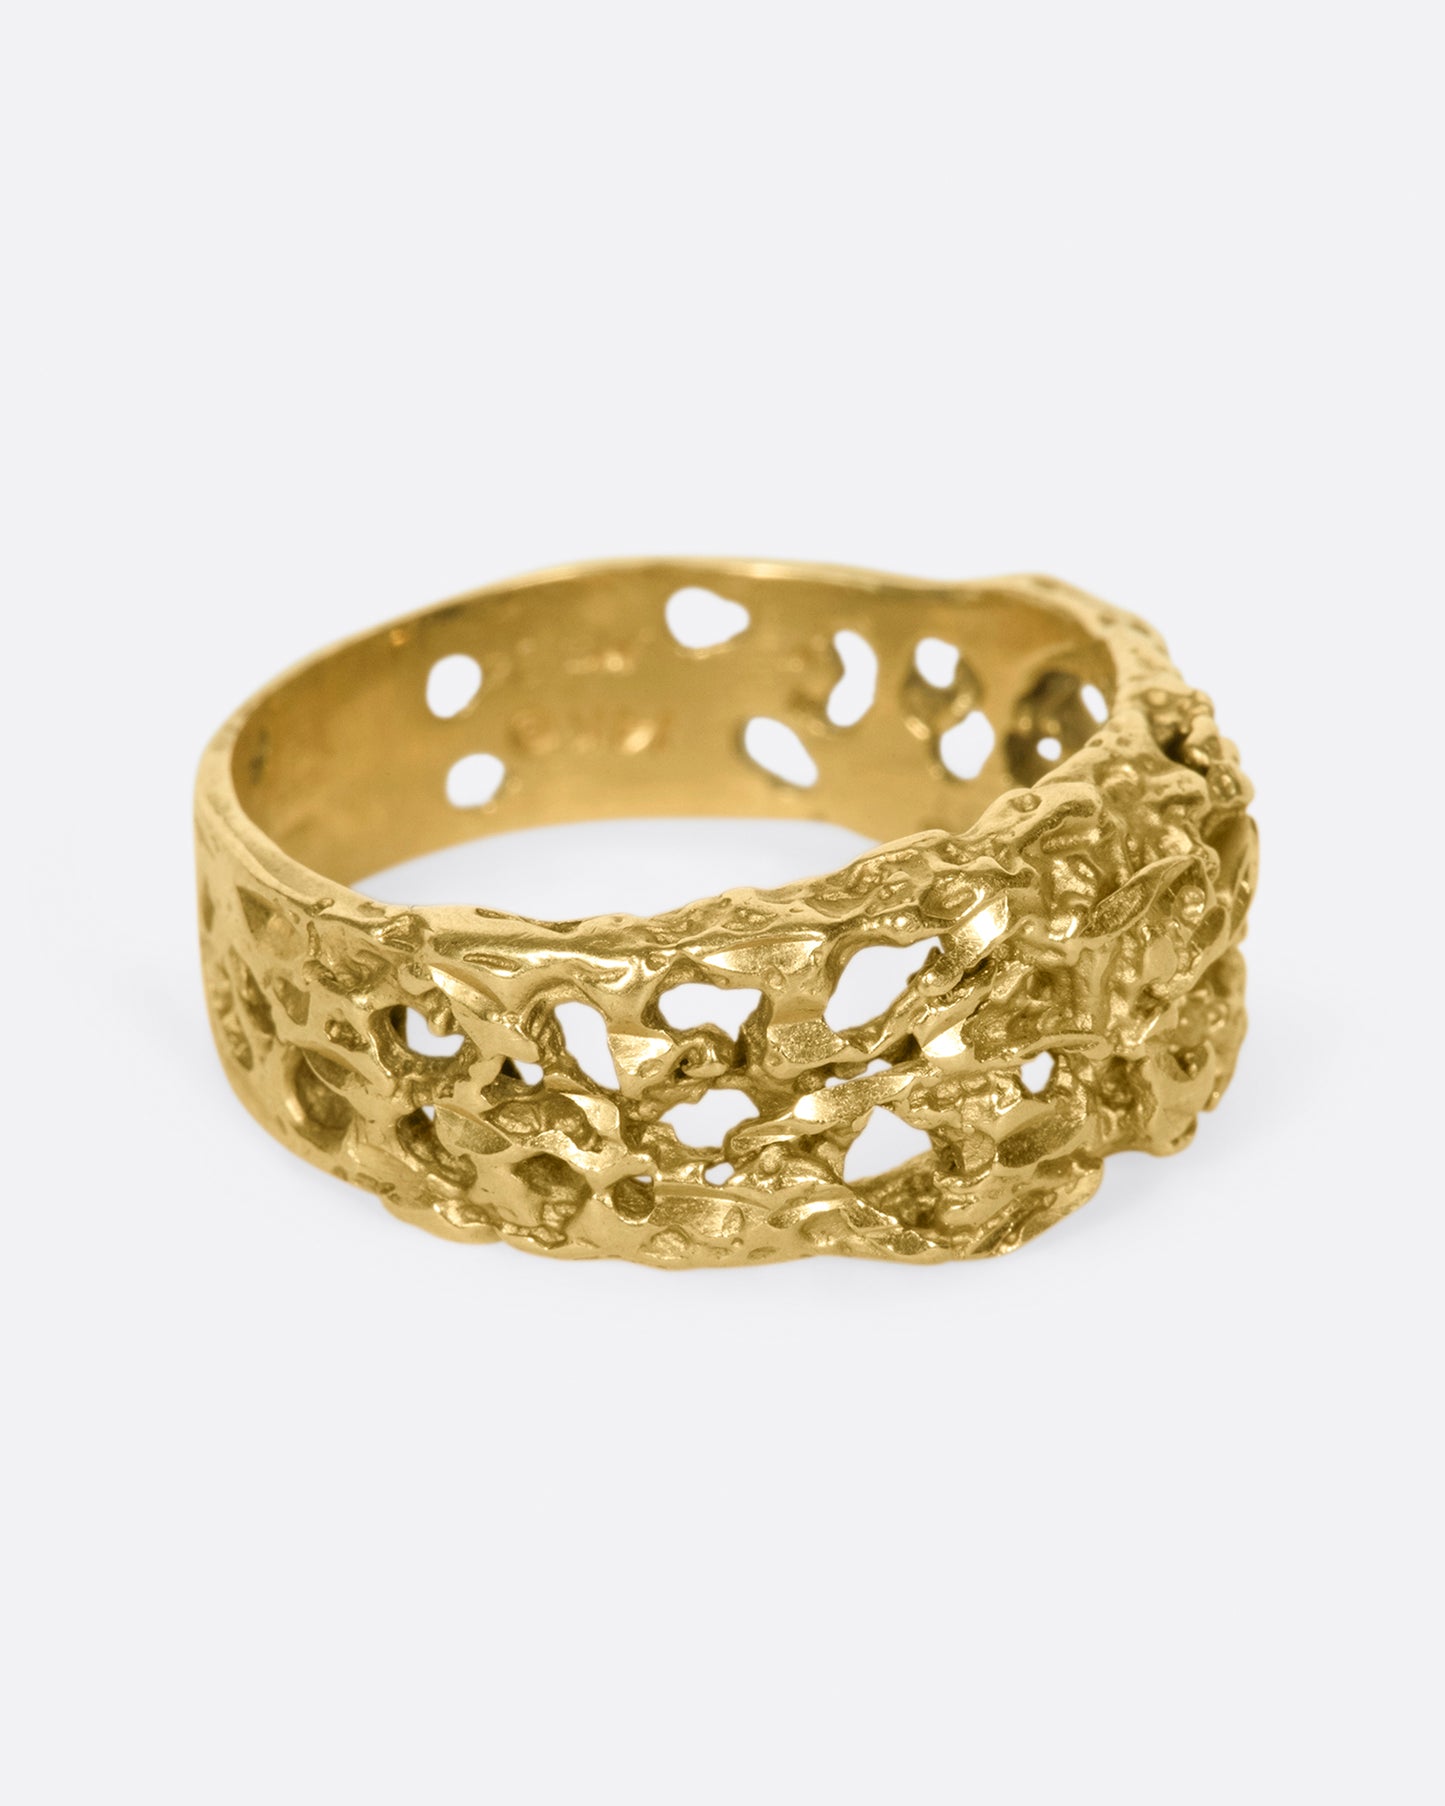 The cutouts on this ring almost look like the gold has eroded away, leaving little windows.